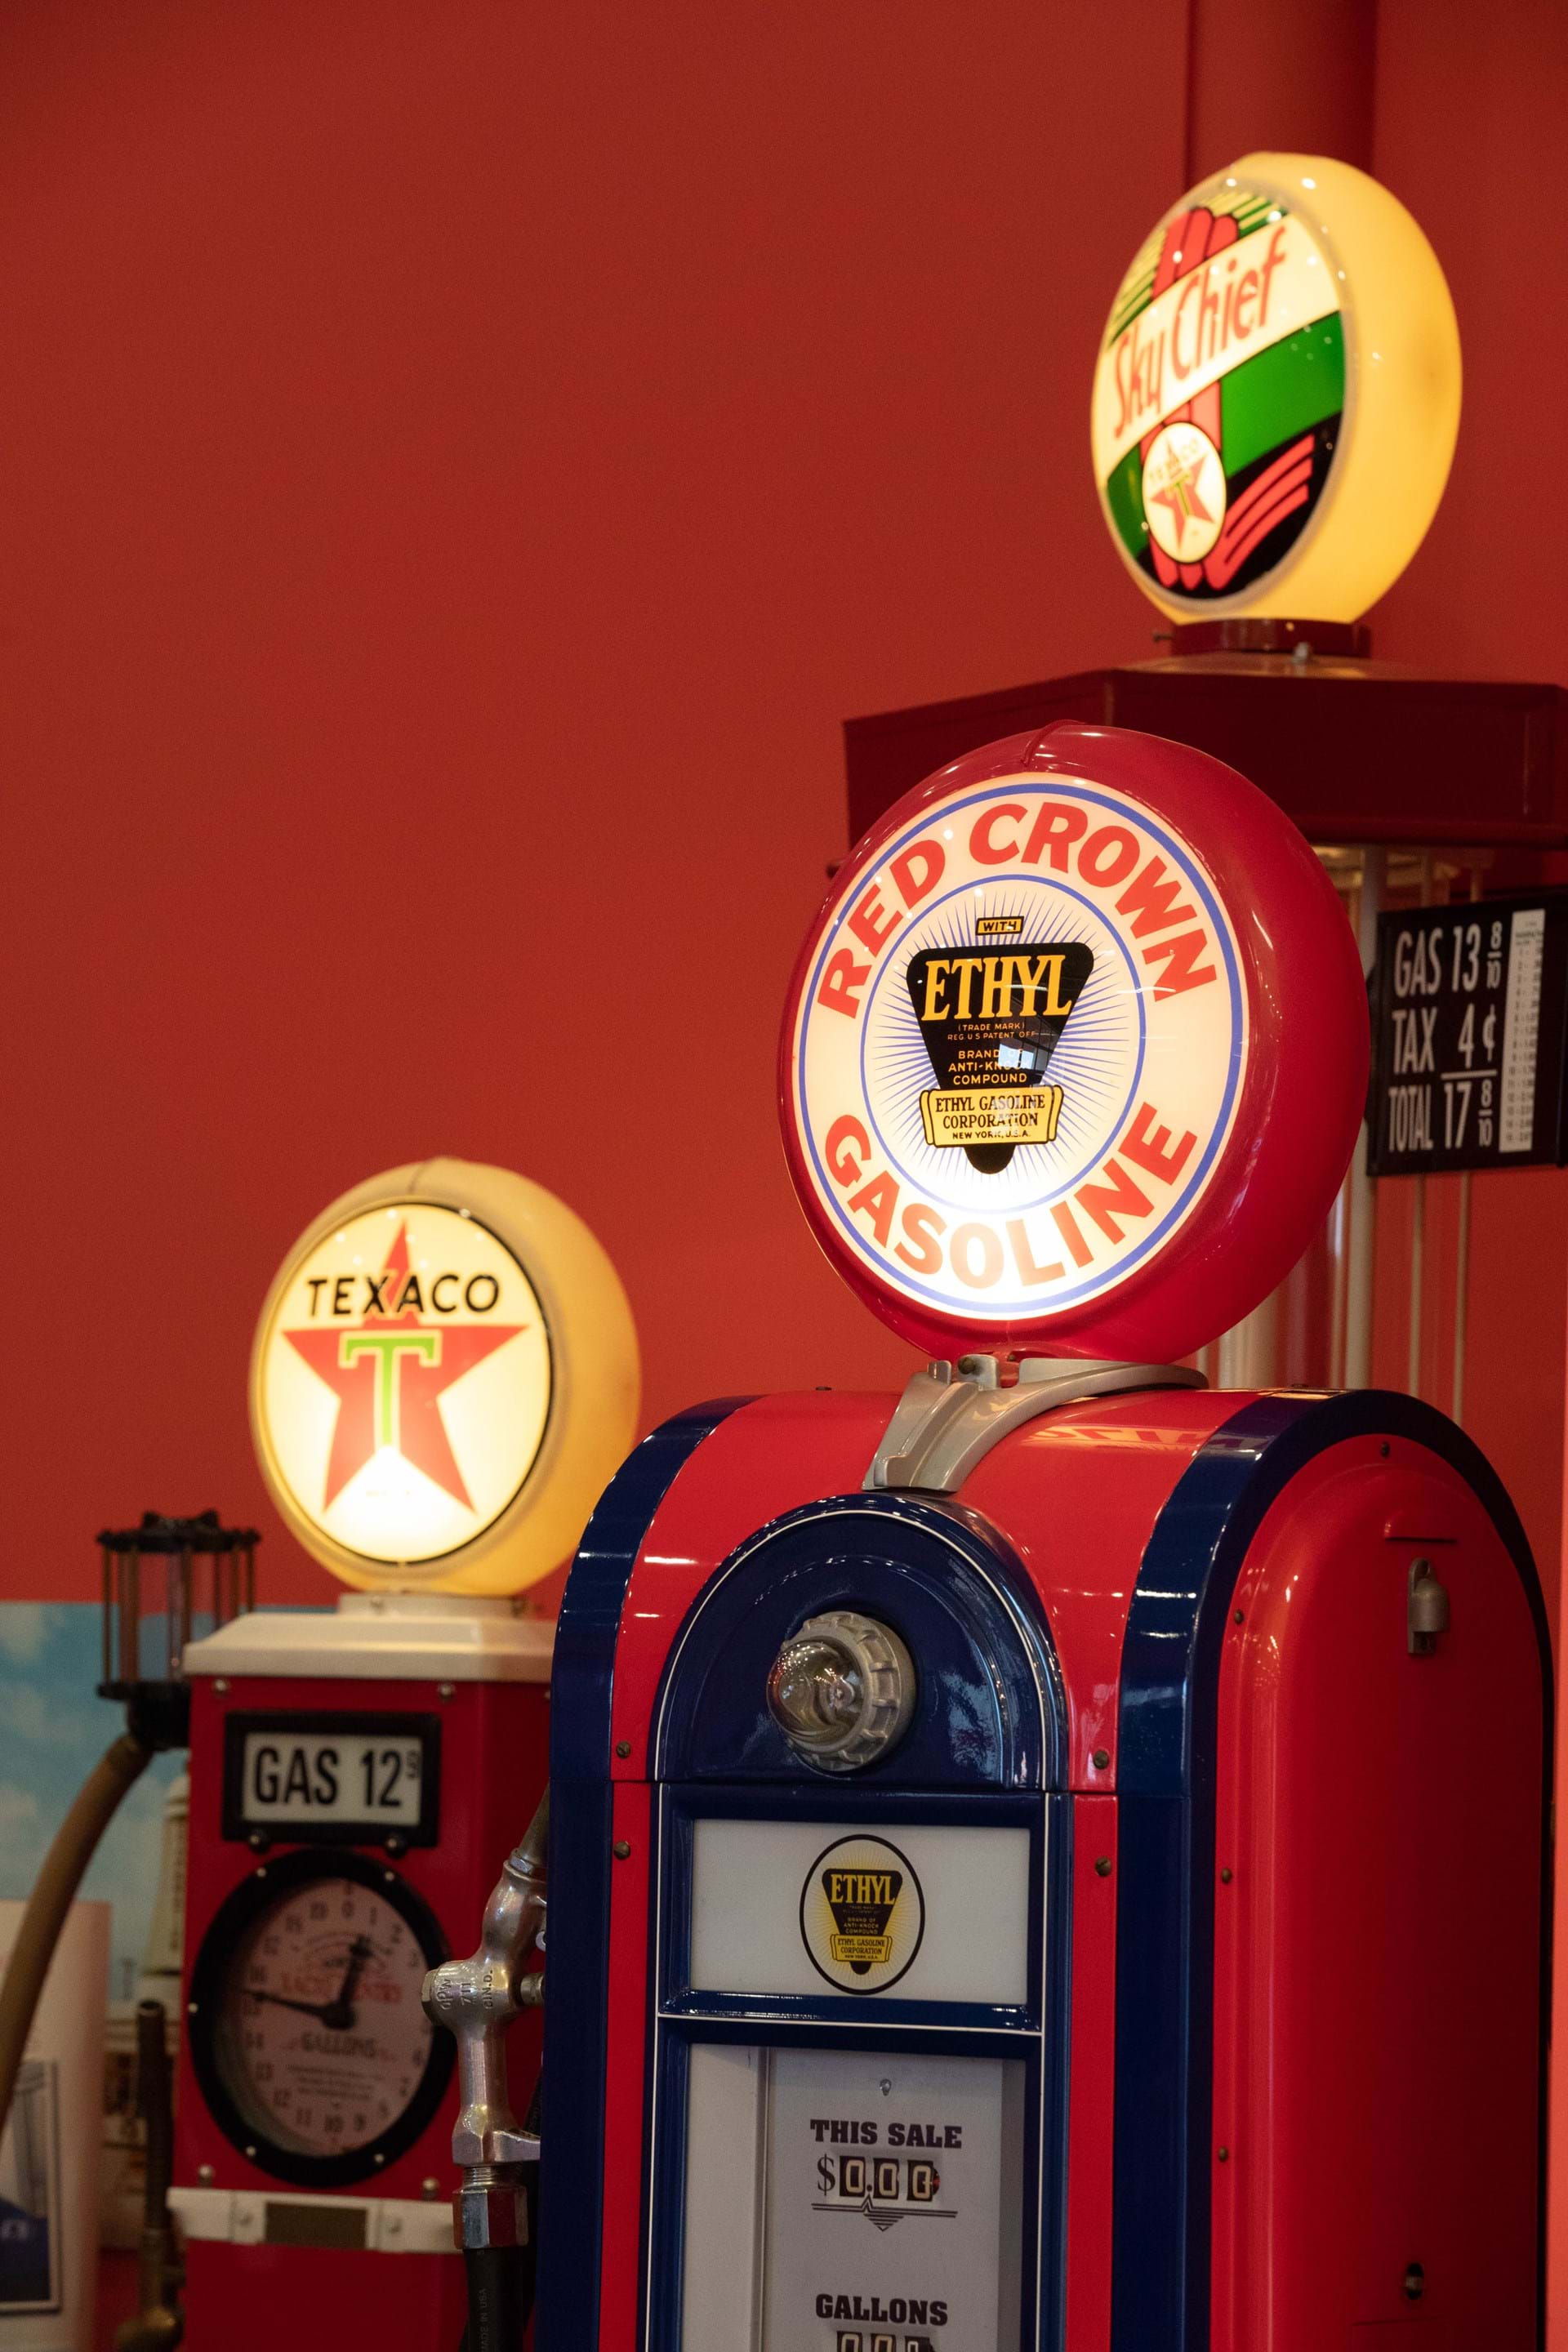 Lots of vintage gas pumps and signage to enjoy!